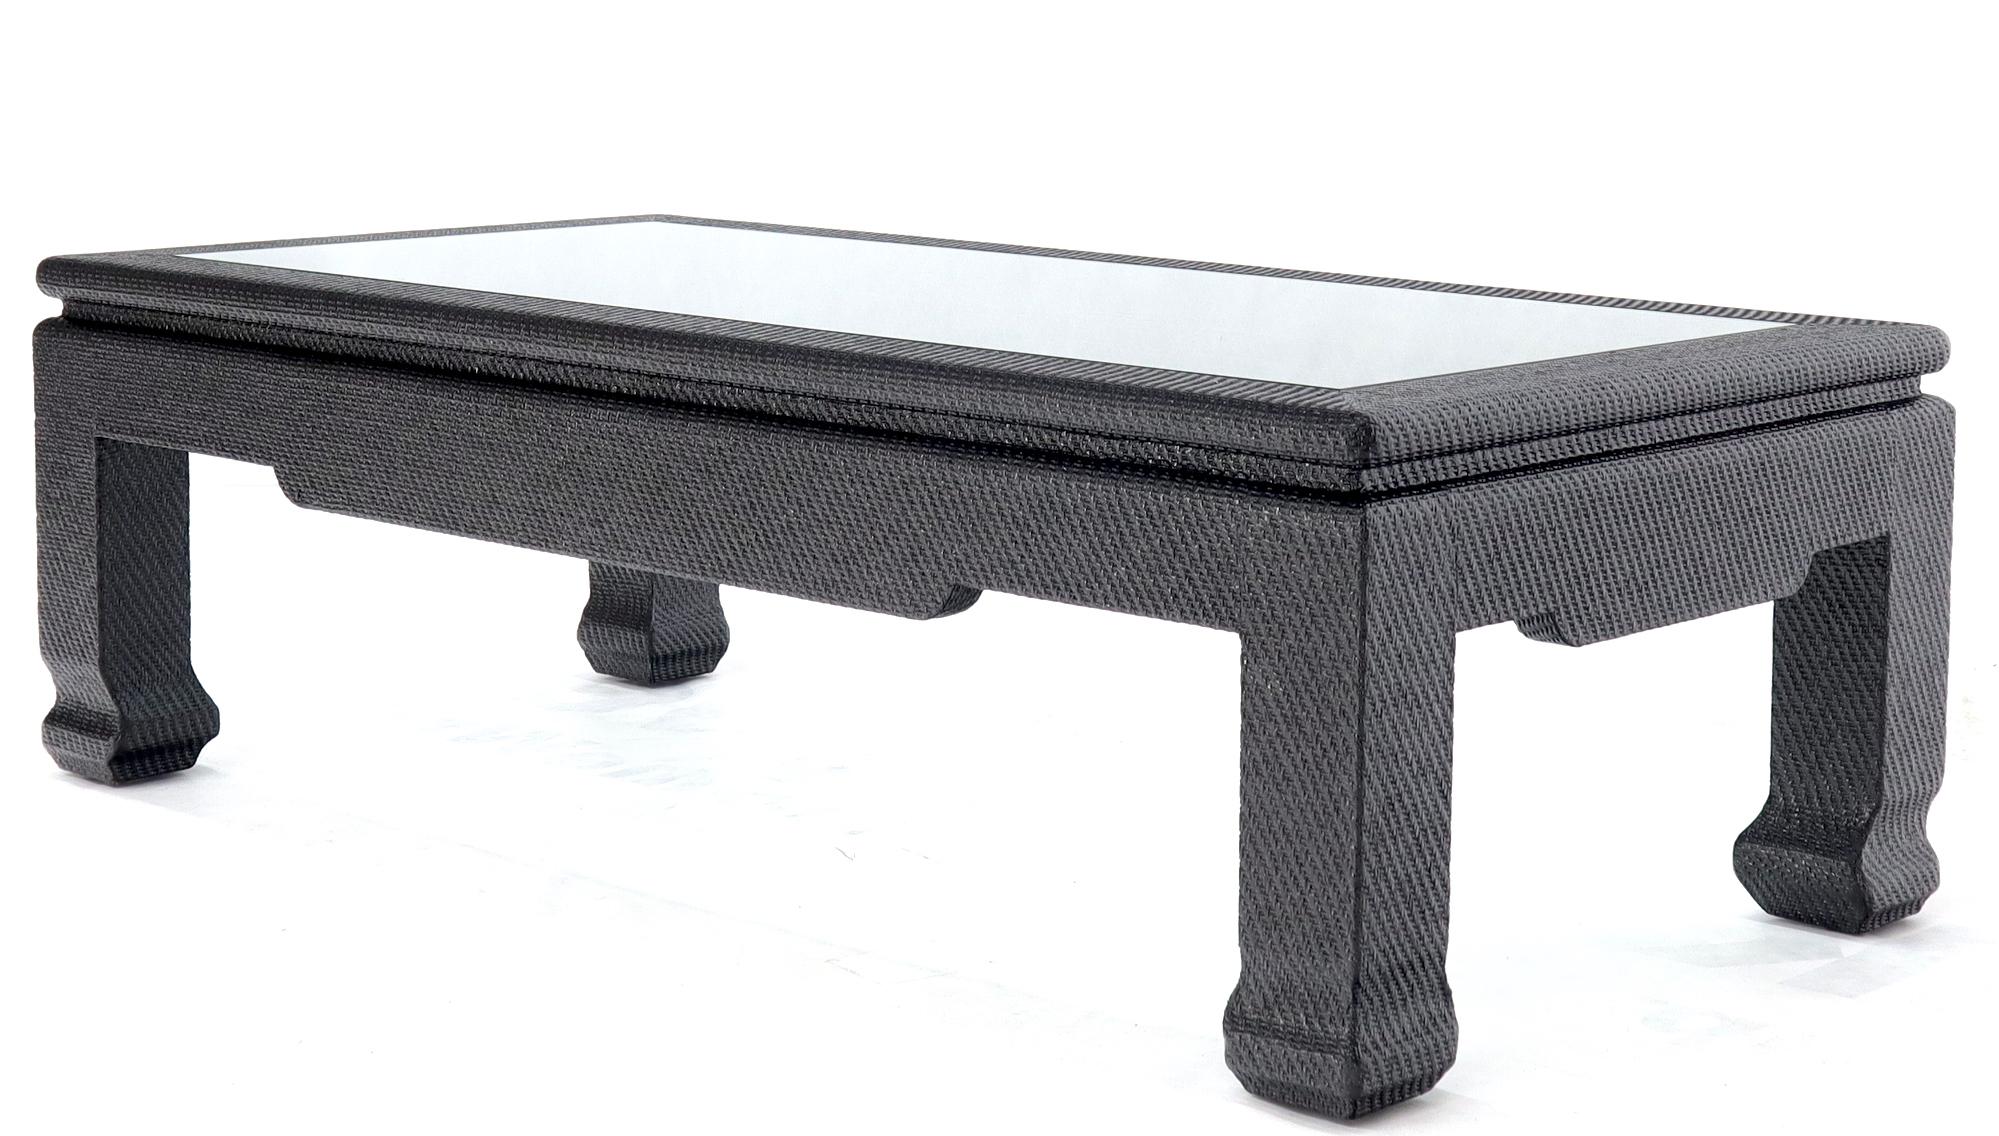 Raffia Cloth Covered Rectangular Glass Top Coffee Table Black For Sale 5